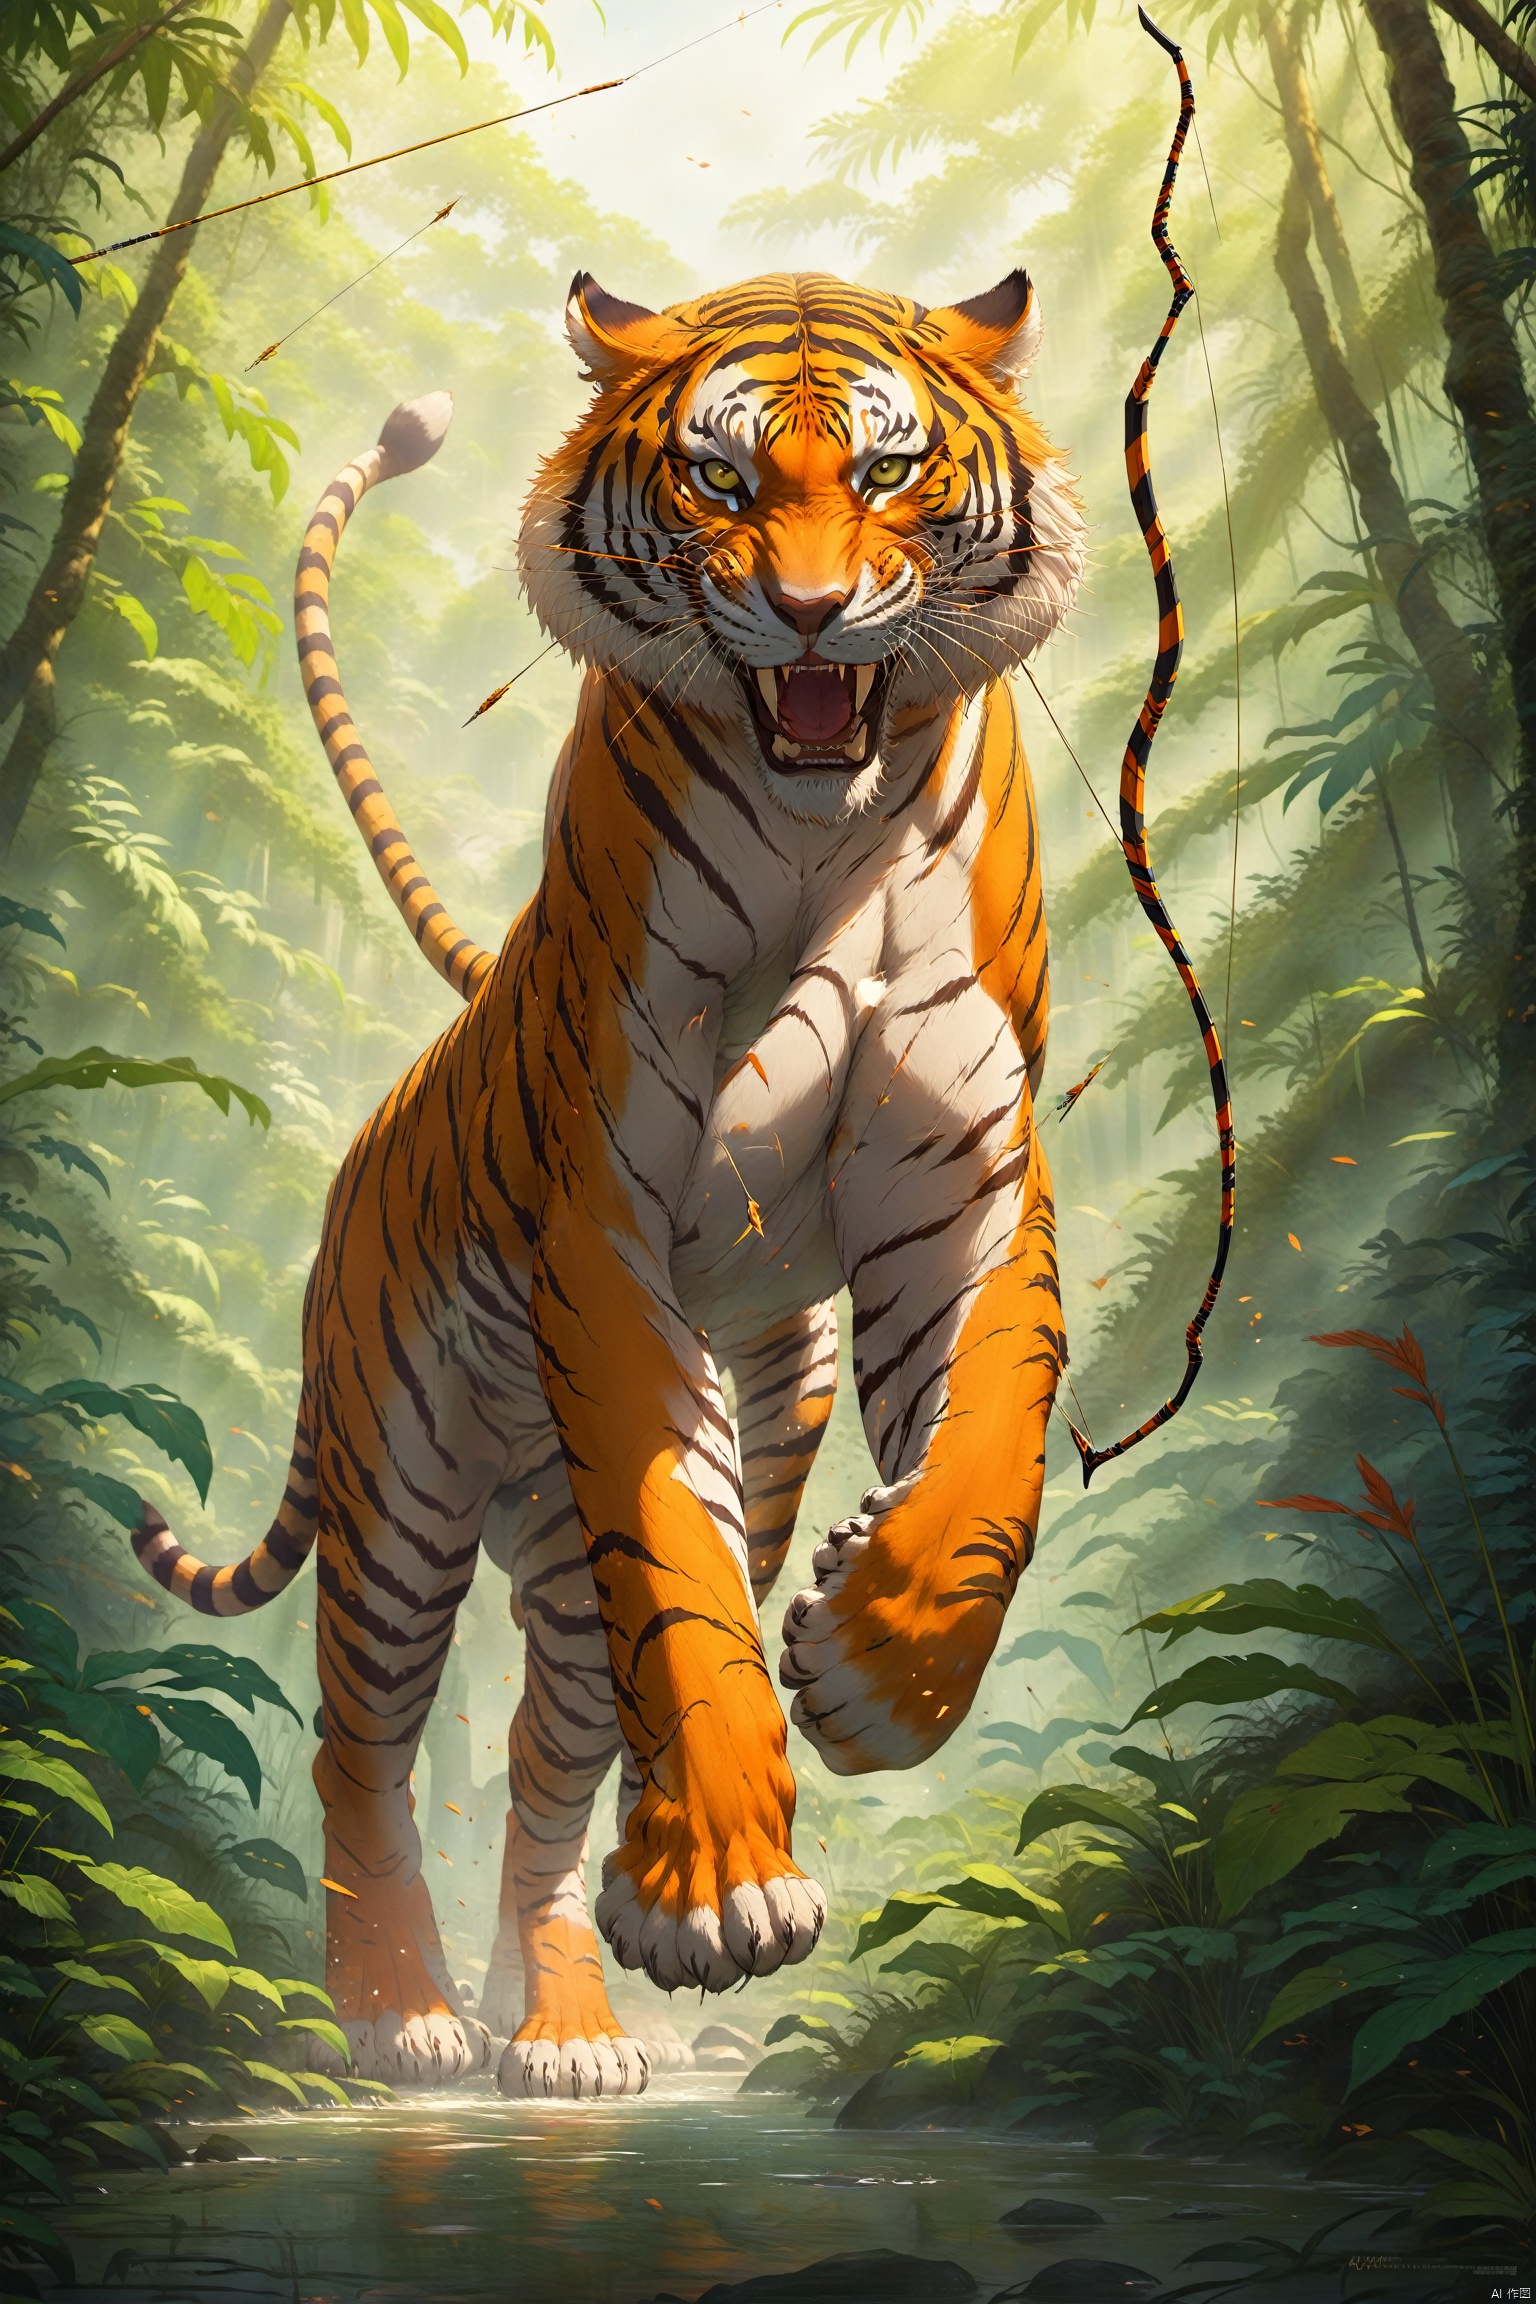 A brave huntress and a majestic tigress, its stripes as bold as the rays of the sun, prowl through the jungle, the huntress’s bowstring drawn, an arrow nocked and ready to fly, the tigress’s fur bristling with excitement, its claws unsheathed, their combined skill and strength enough to overcome any foe.